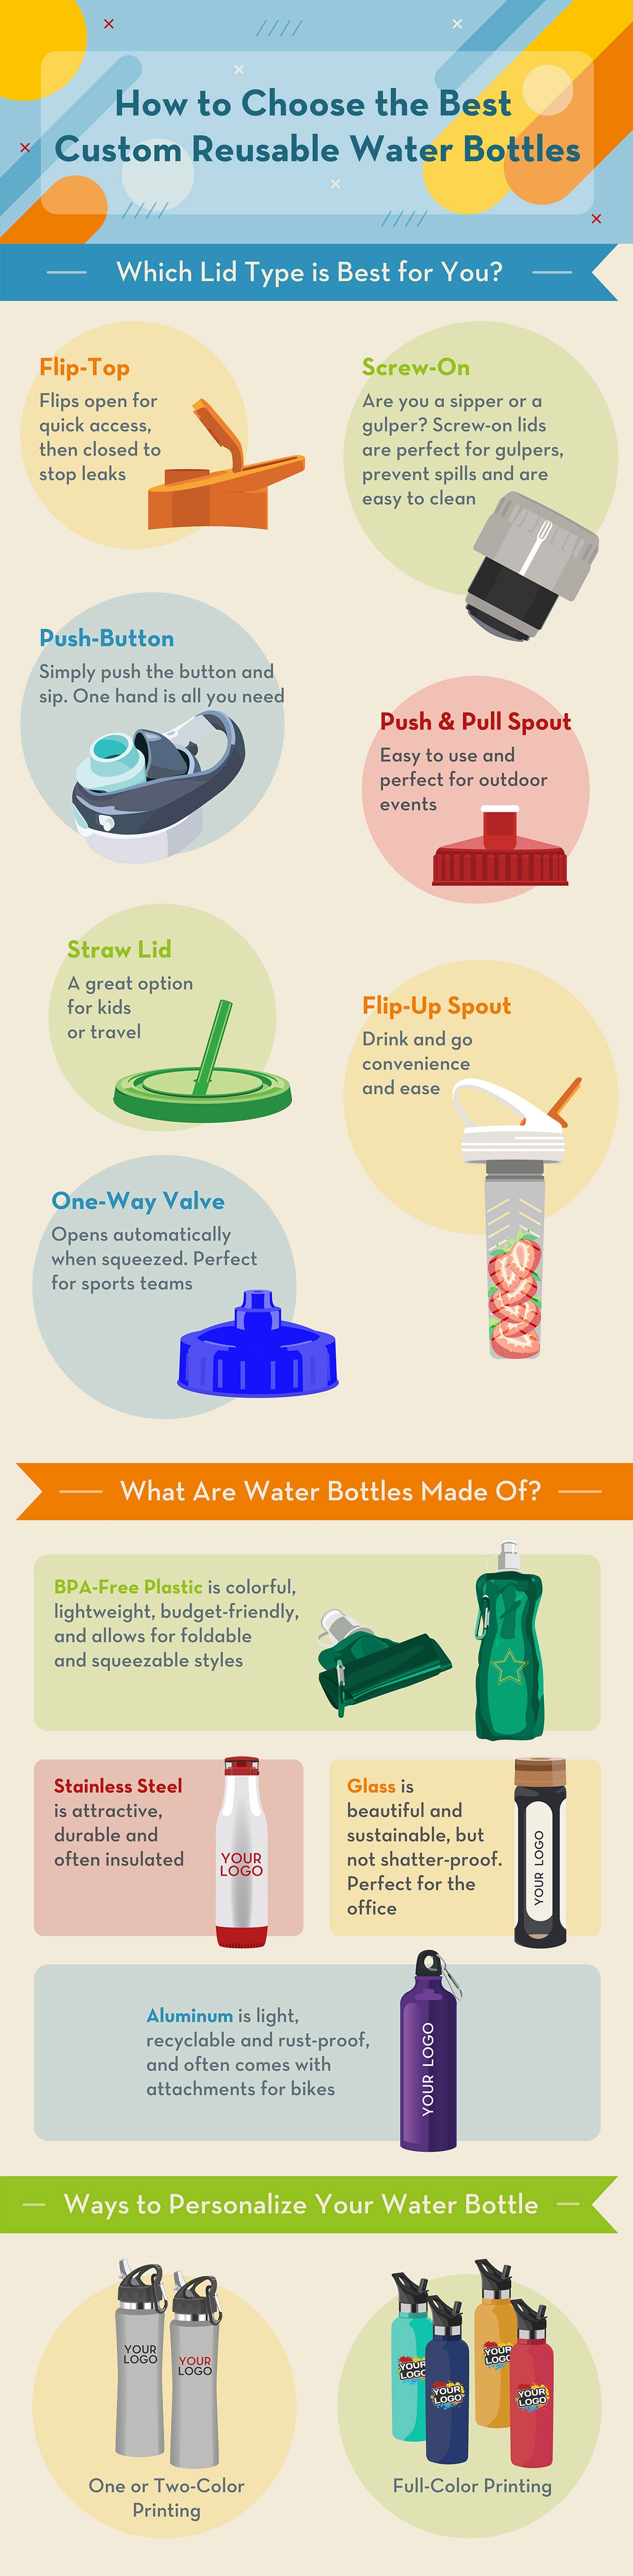 Reusable Water Bottle Infographic